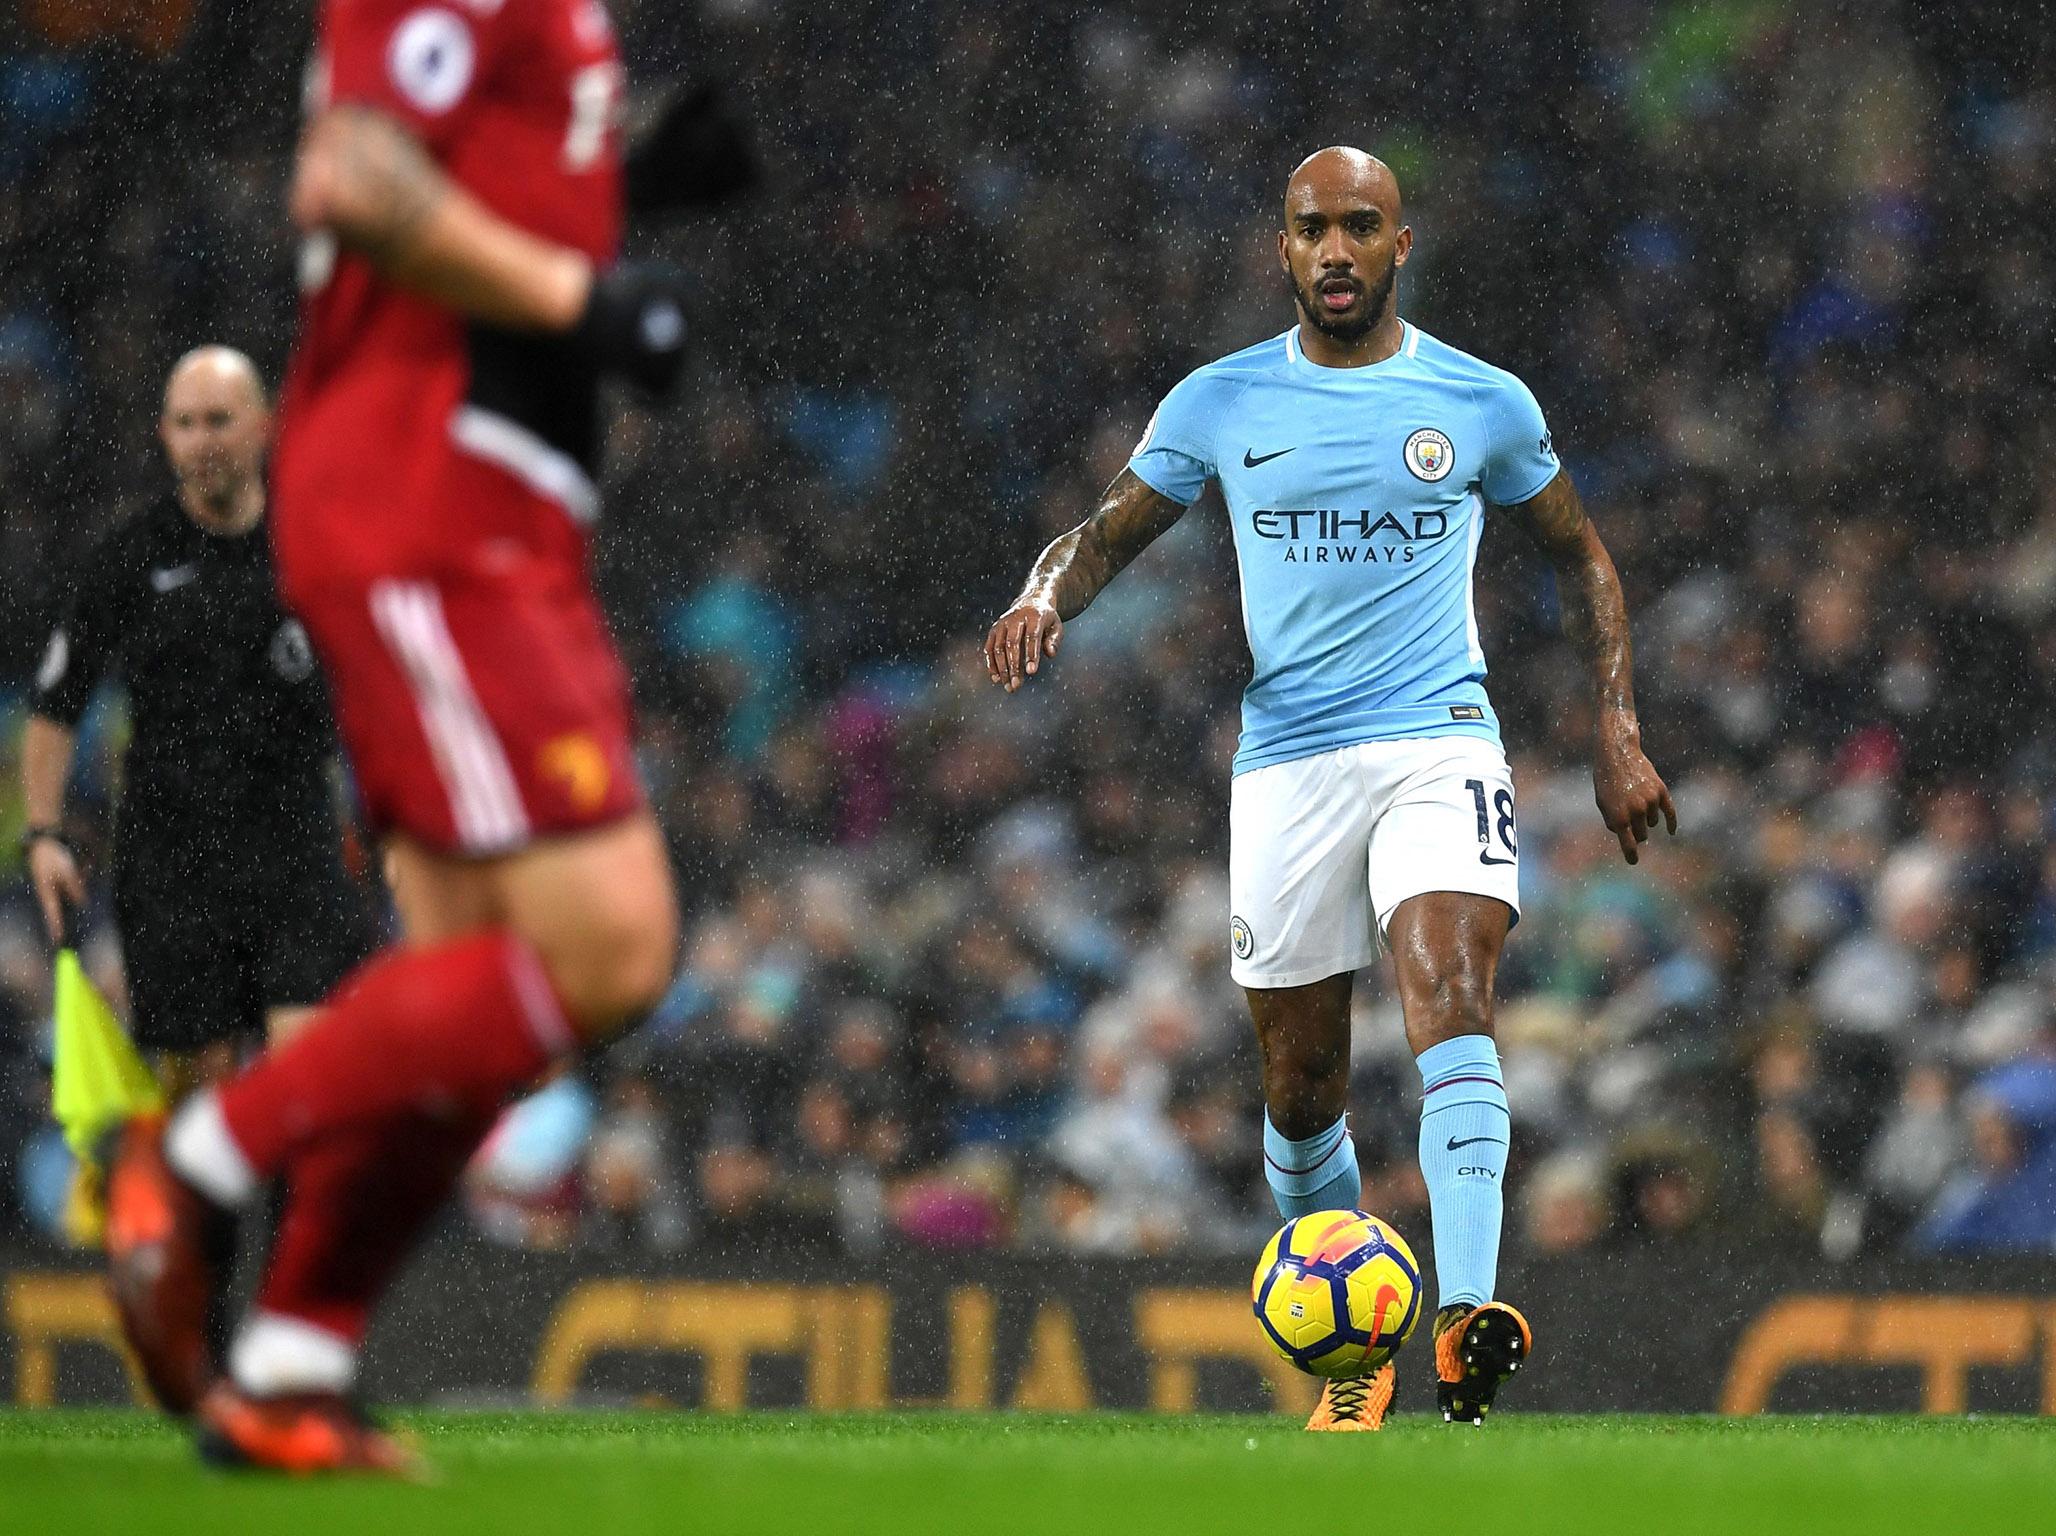 Fabian Delph’s renaissance is a reminder of the perils of instant judgment